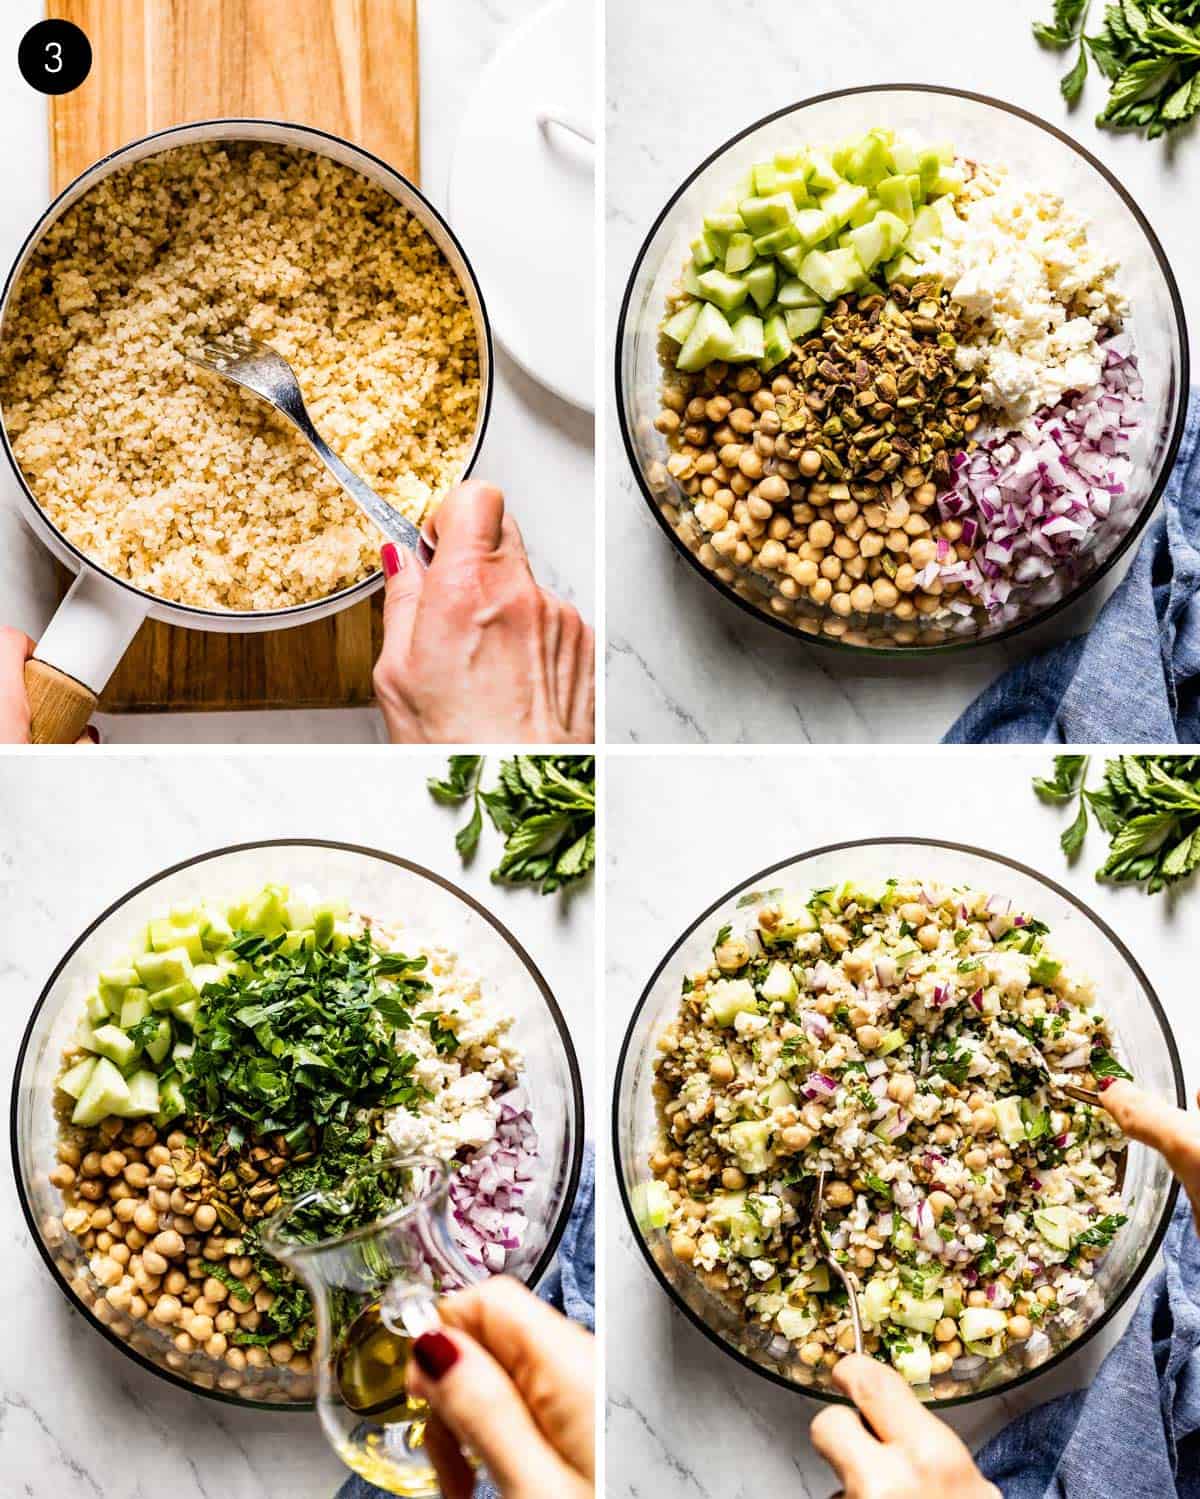 A person showing how to assemble a bulgur salad with veggies, herbs, cheese, and pistachios. 